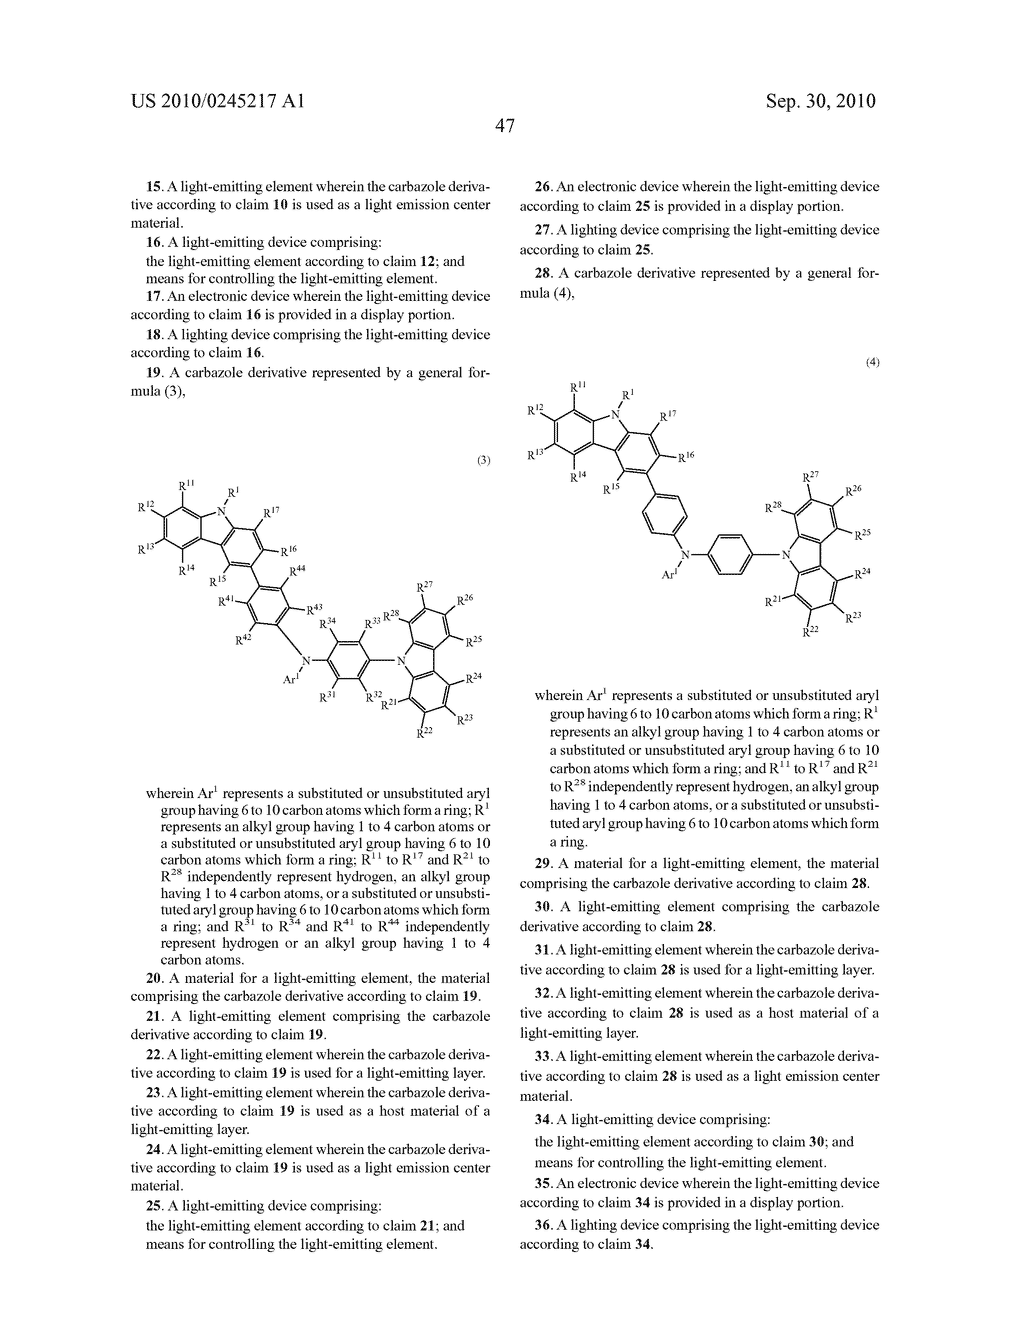 CARBAZOLE DERIVATIVE, LIGHT-EMITTING ELEMENT MATERIAL, LIGHT-EMITTING ELEMENT, LIGHT-EMITTING DEVICE, ELECTRONIC DEVICE, AND LIGHTING DEVICE - diagram, schematic, and image 75